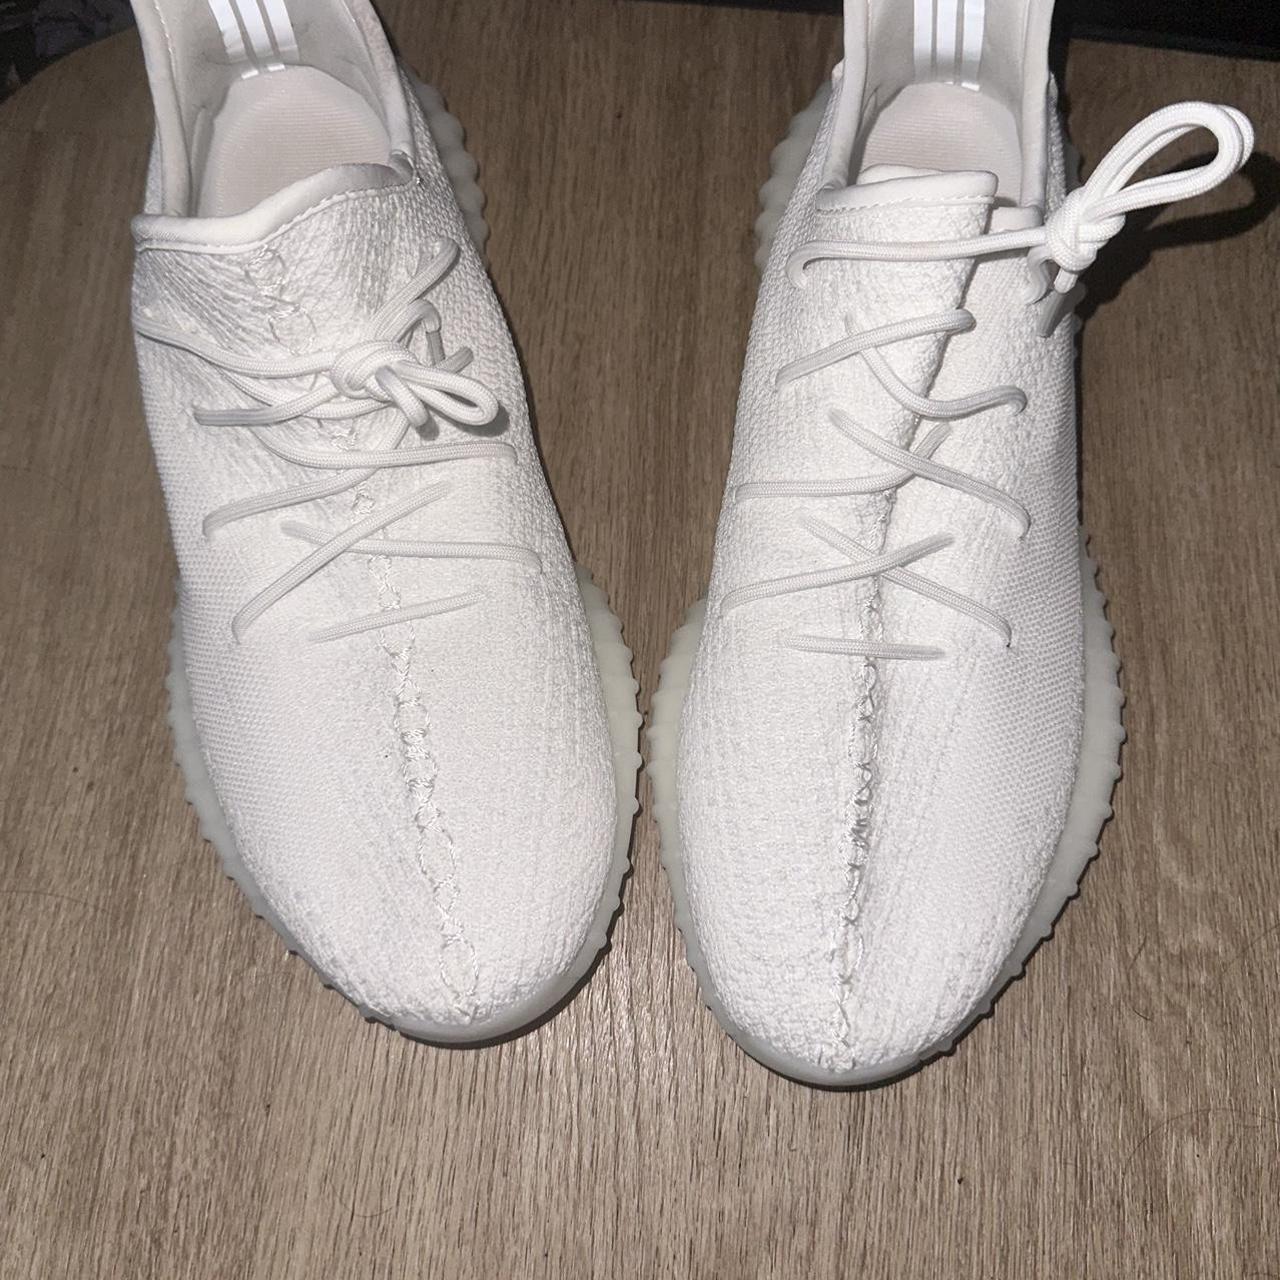 I have Yeezy boost triple white size 11.5 but I... - Depop